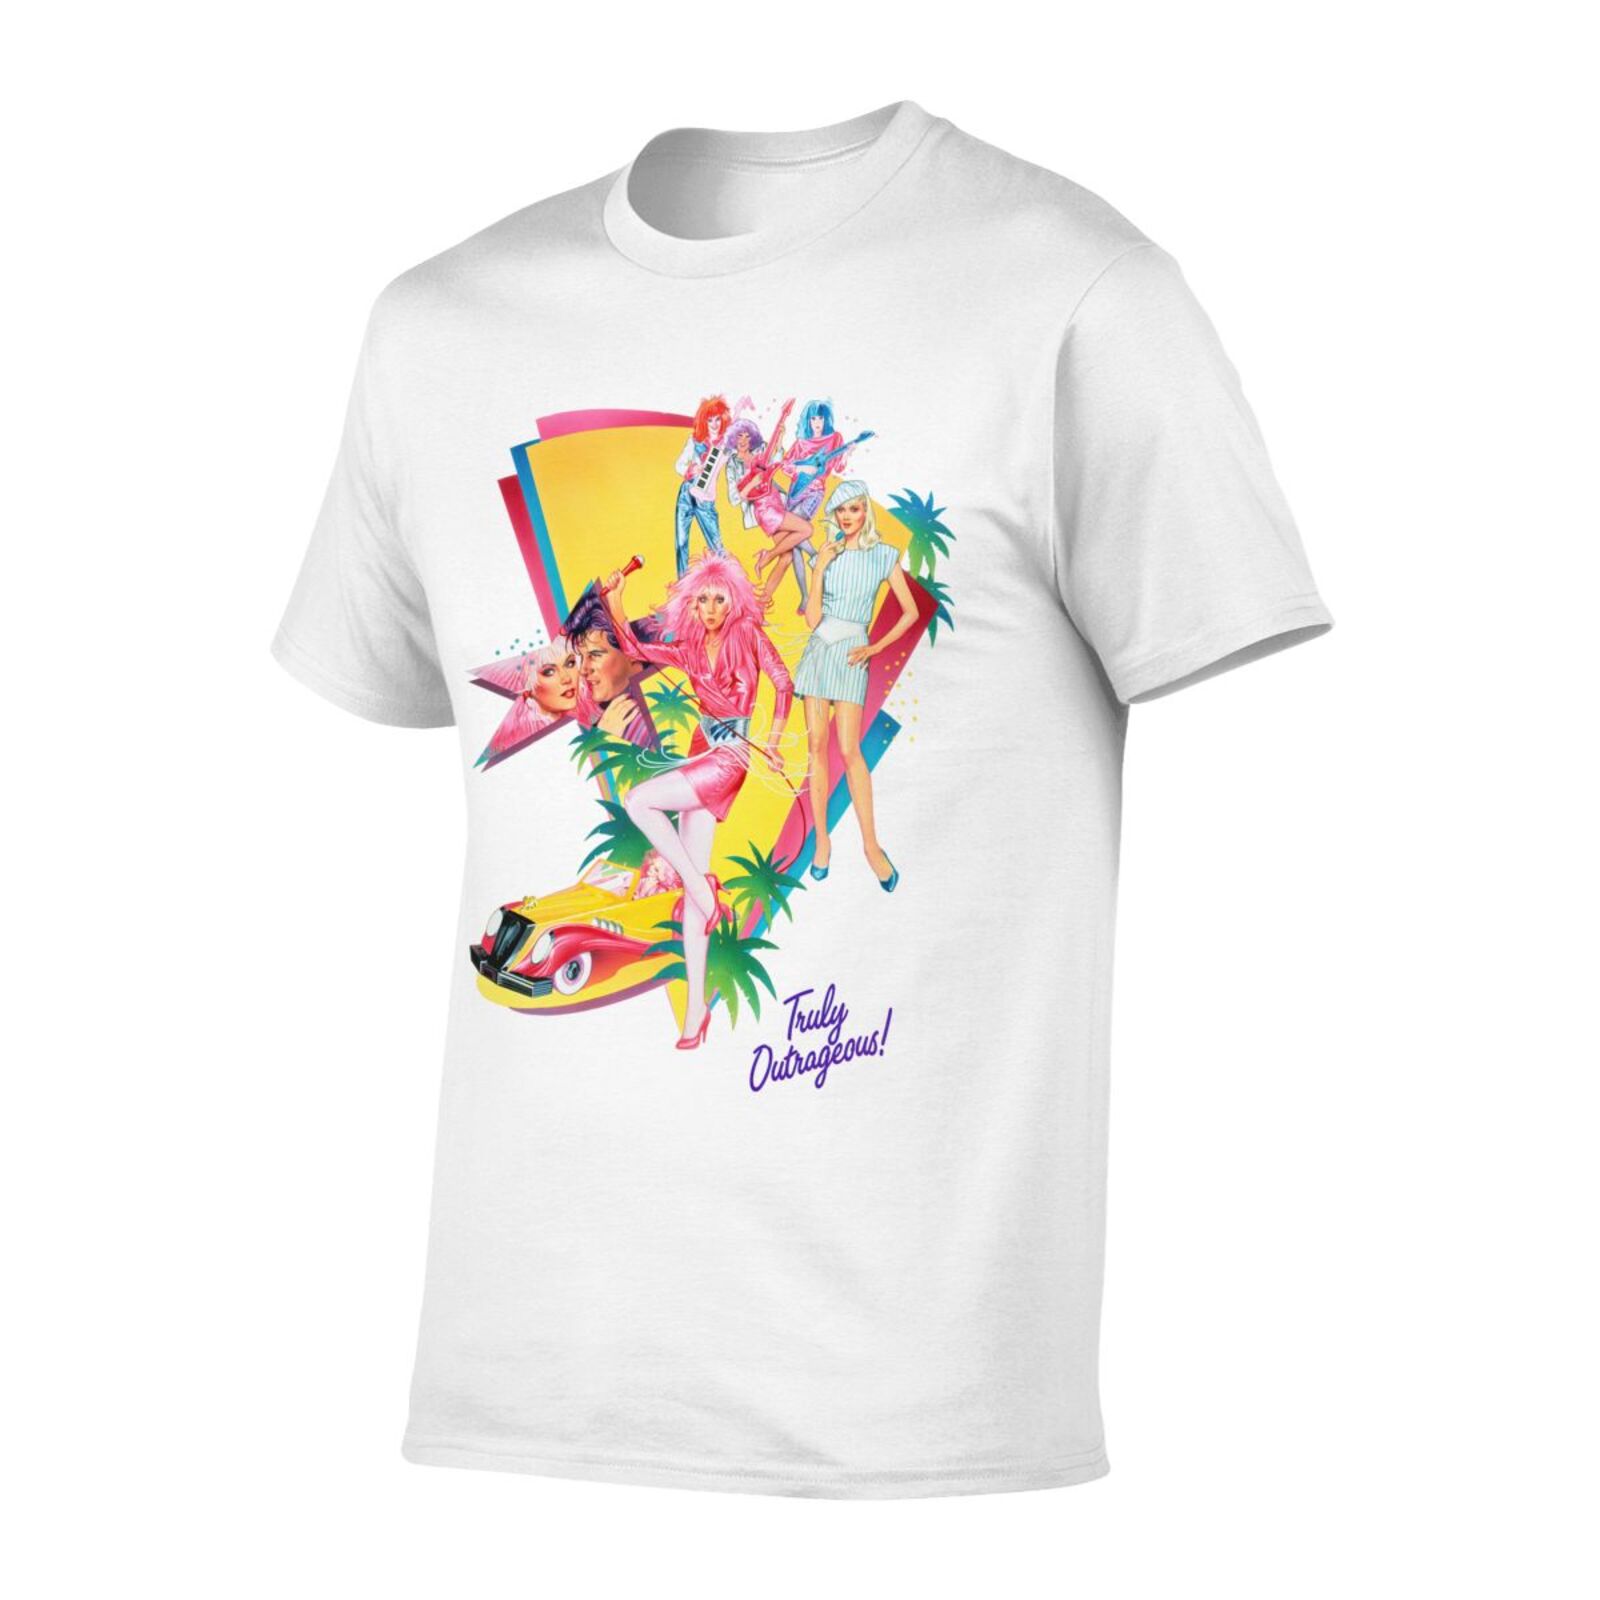 Jem and The Holograms Sublimation T-Shirt Mens Small T-shirts